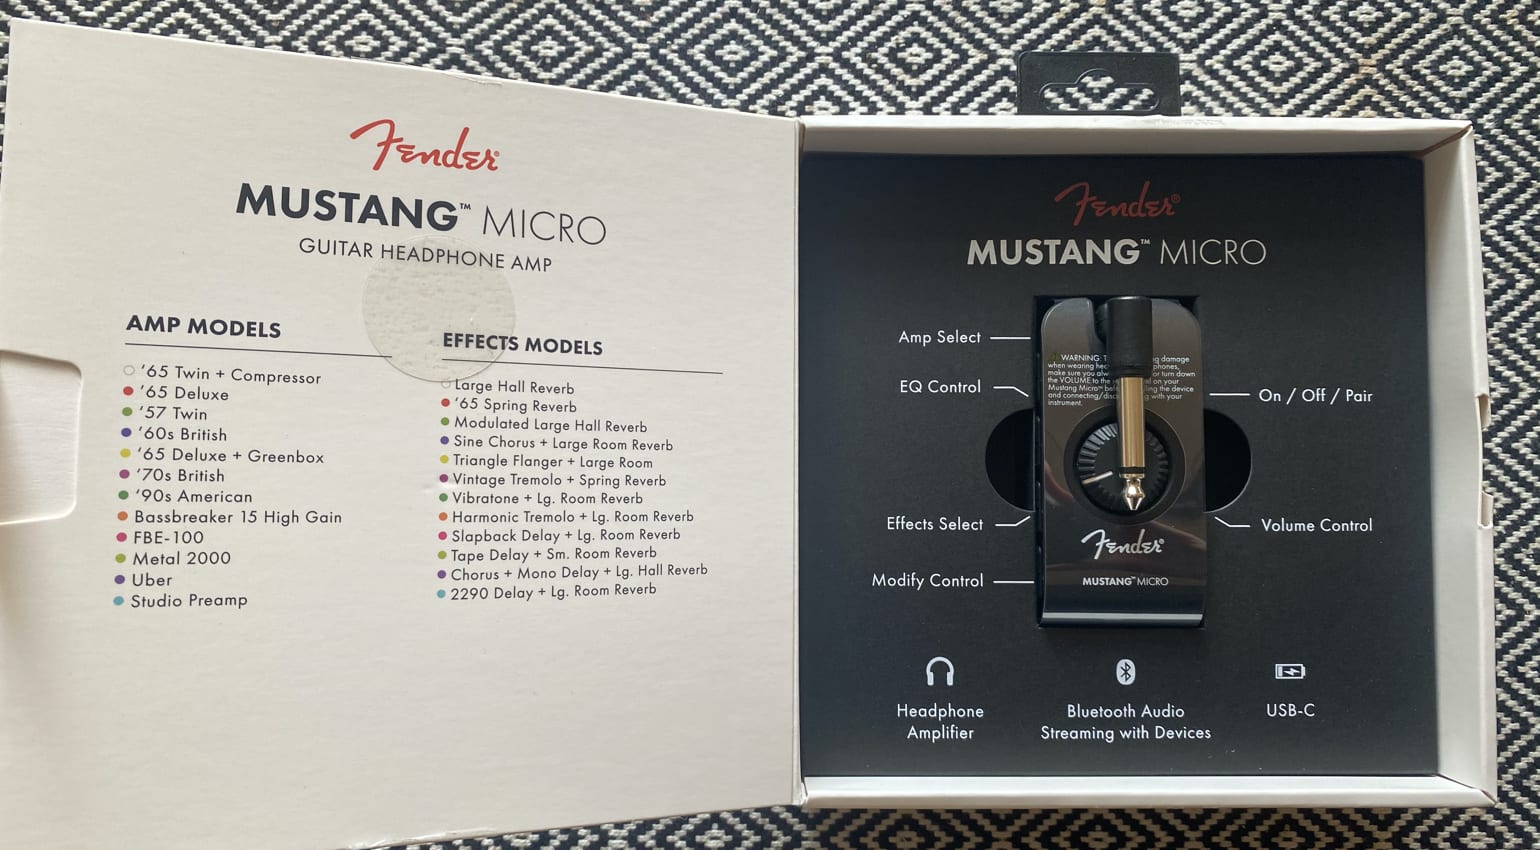 First Look Review: Plug in and go with Fender's Mustang Micro 